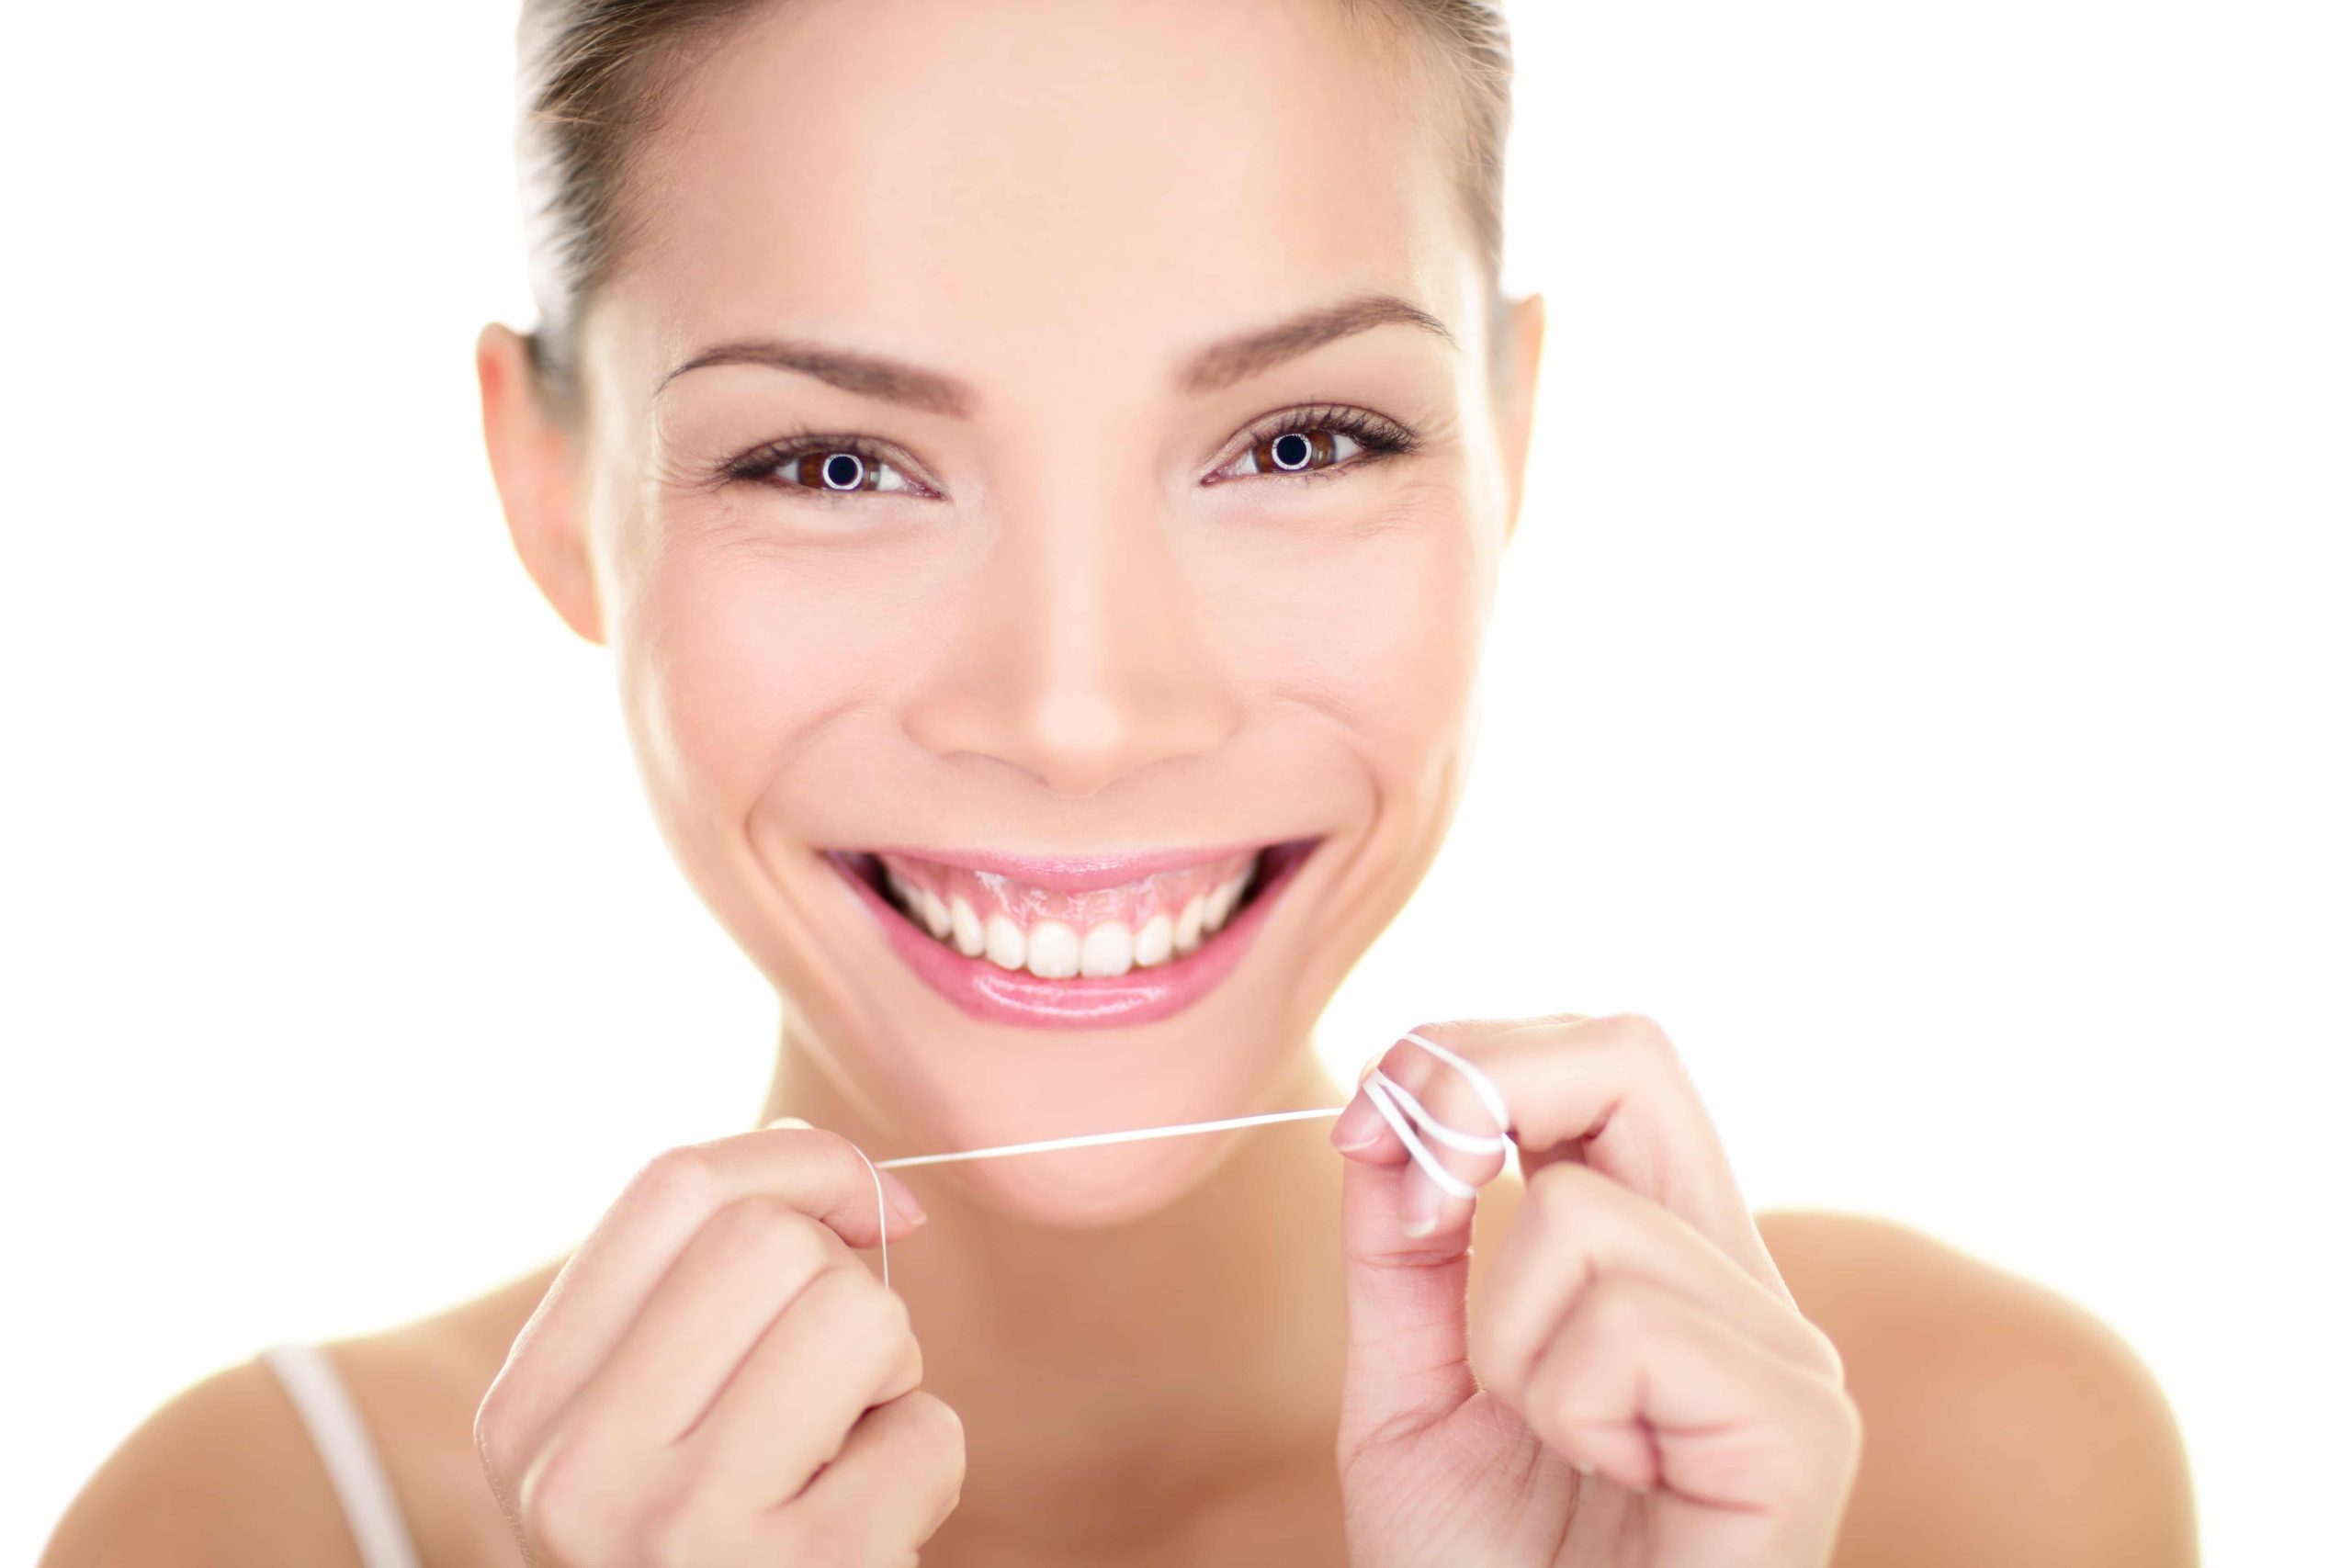 Woman Flossing Teeth While Smiling